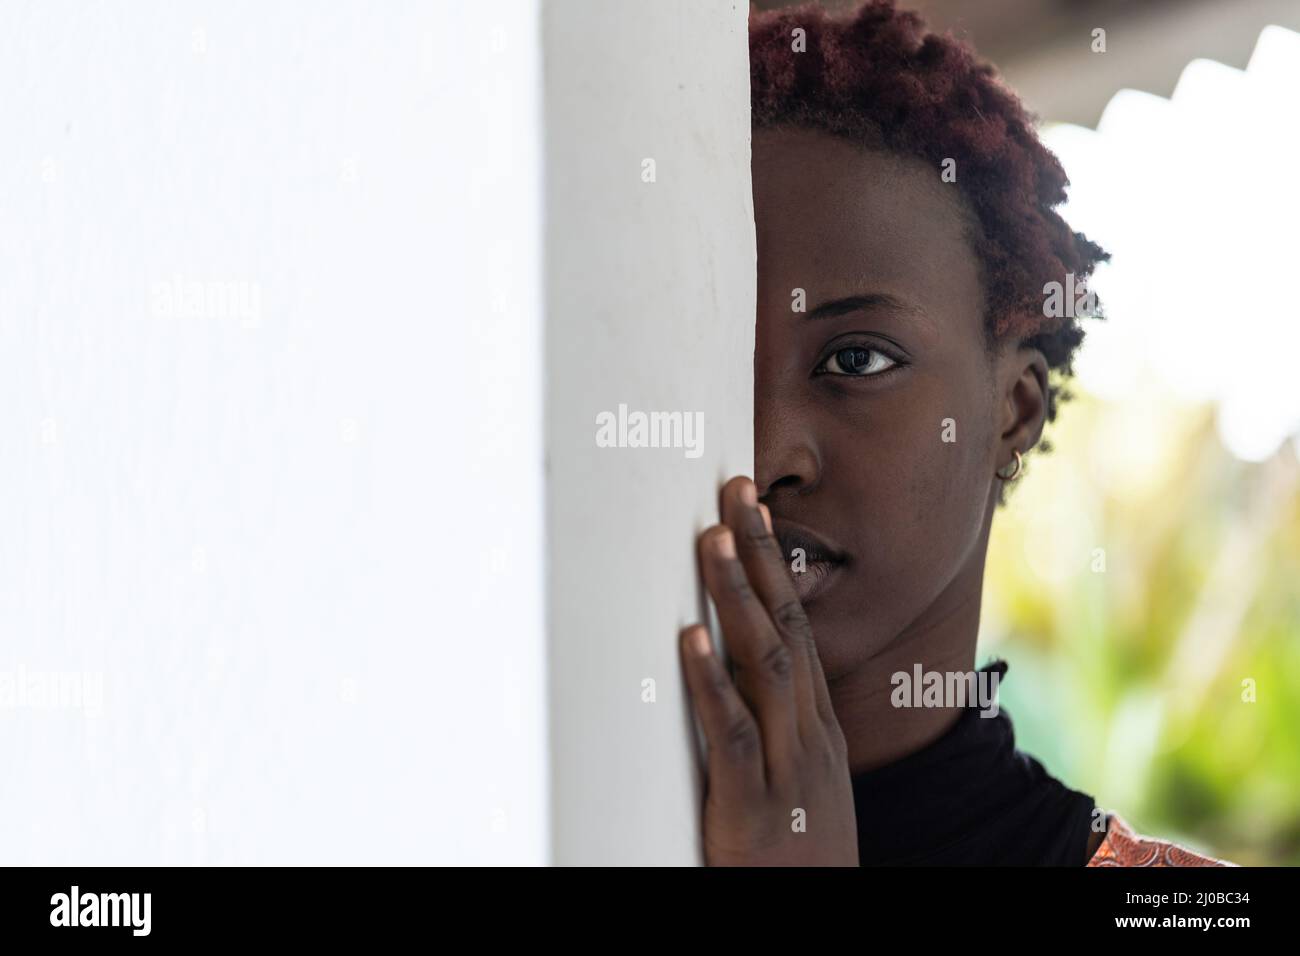 Half face portrait of a beautiful young African girl with short curly hair and a pensive expression on her face leaning against a wall Stock Photo